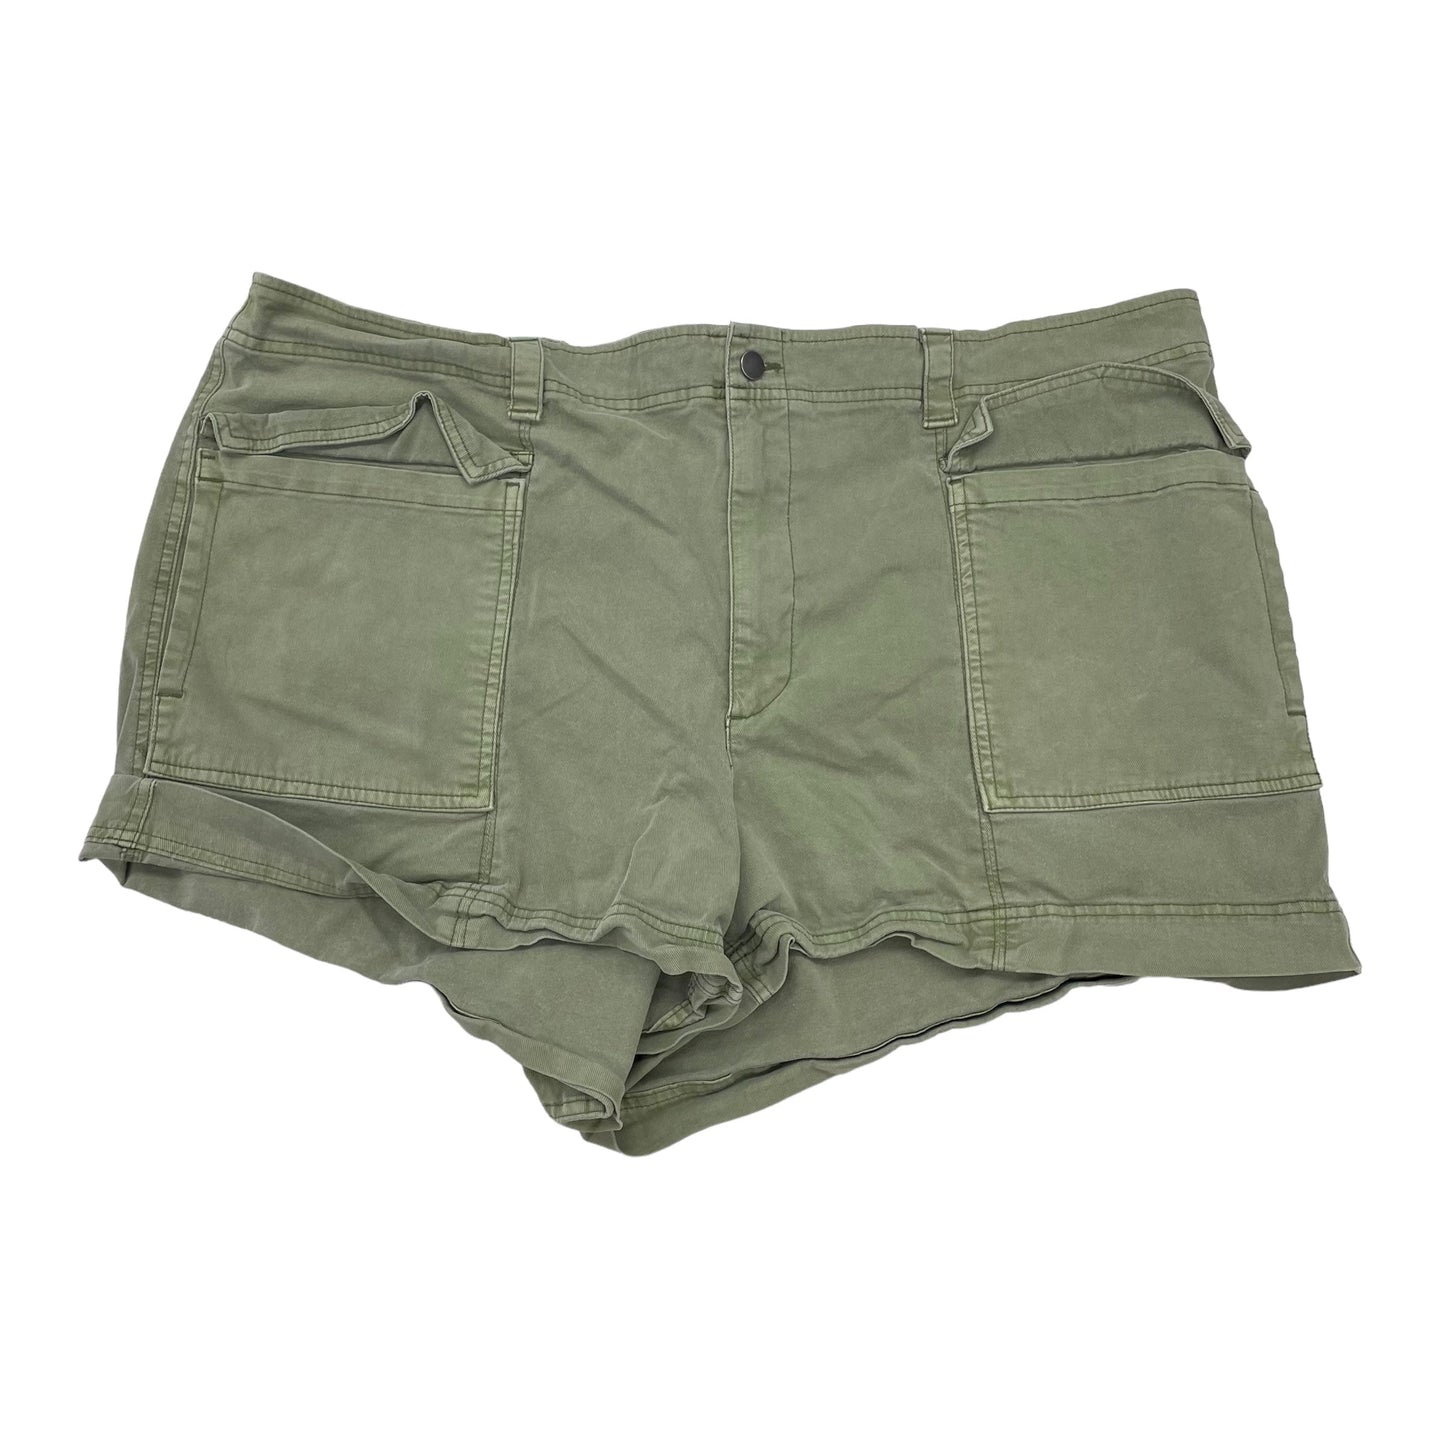 GREEN OLD NAVY SHORTS, Size 3X